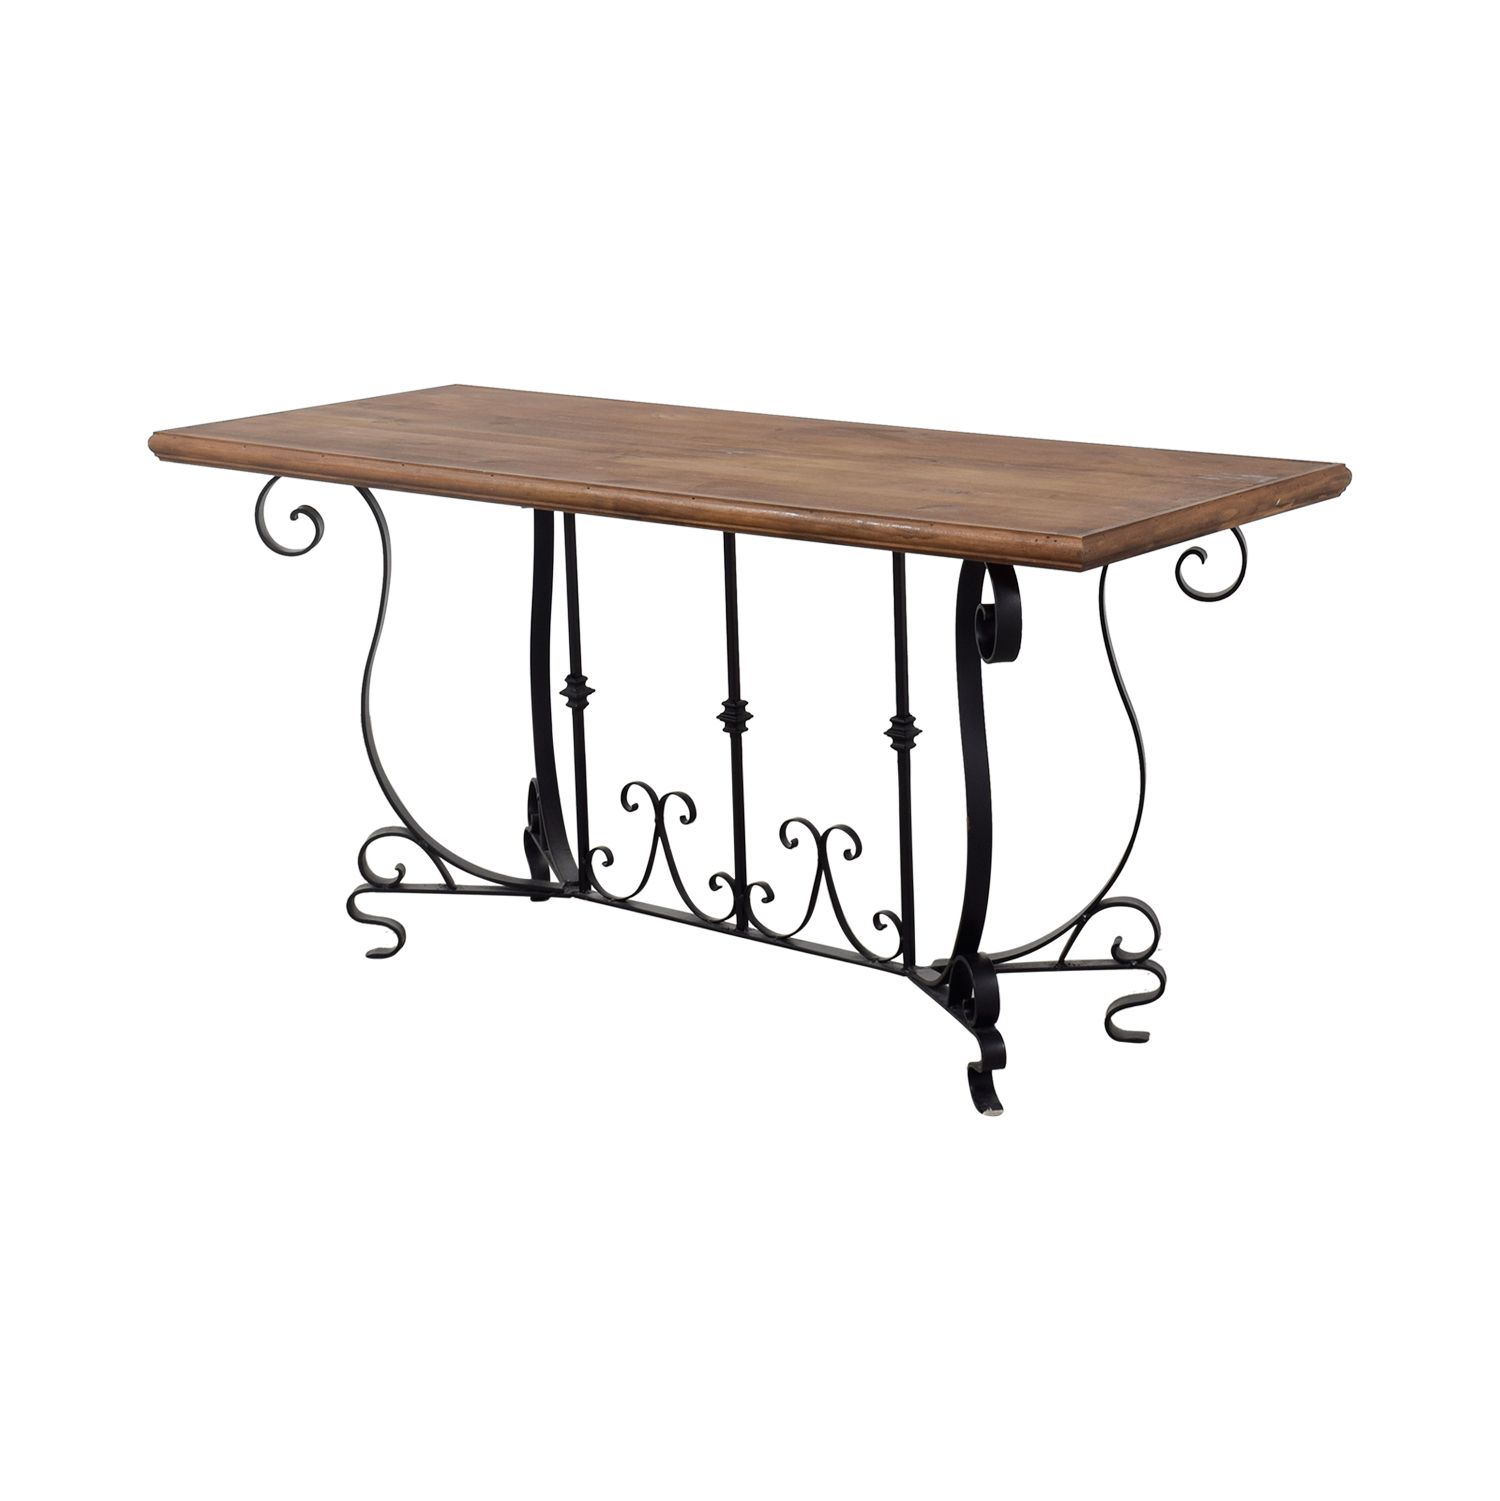 [%90% Off – Black Iron Scroll Base And Rustic Wood Console Inside Famous Black Metal Console Tables|black Metal Console Tables Within Preferred 90% Off – Black Iron Scroll Base And Rustic Wood Console|most Recent Black Metal Console Tables Inside 90% Off – Black Iron Scroll Base And Rustic Wood Console|latest 90% Off – Black Iron Scroll Base And Rustic Wood Console For Black Metal Console Tables%] (View 8 of 10)